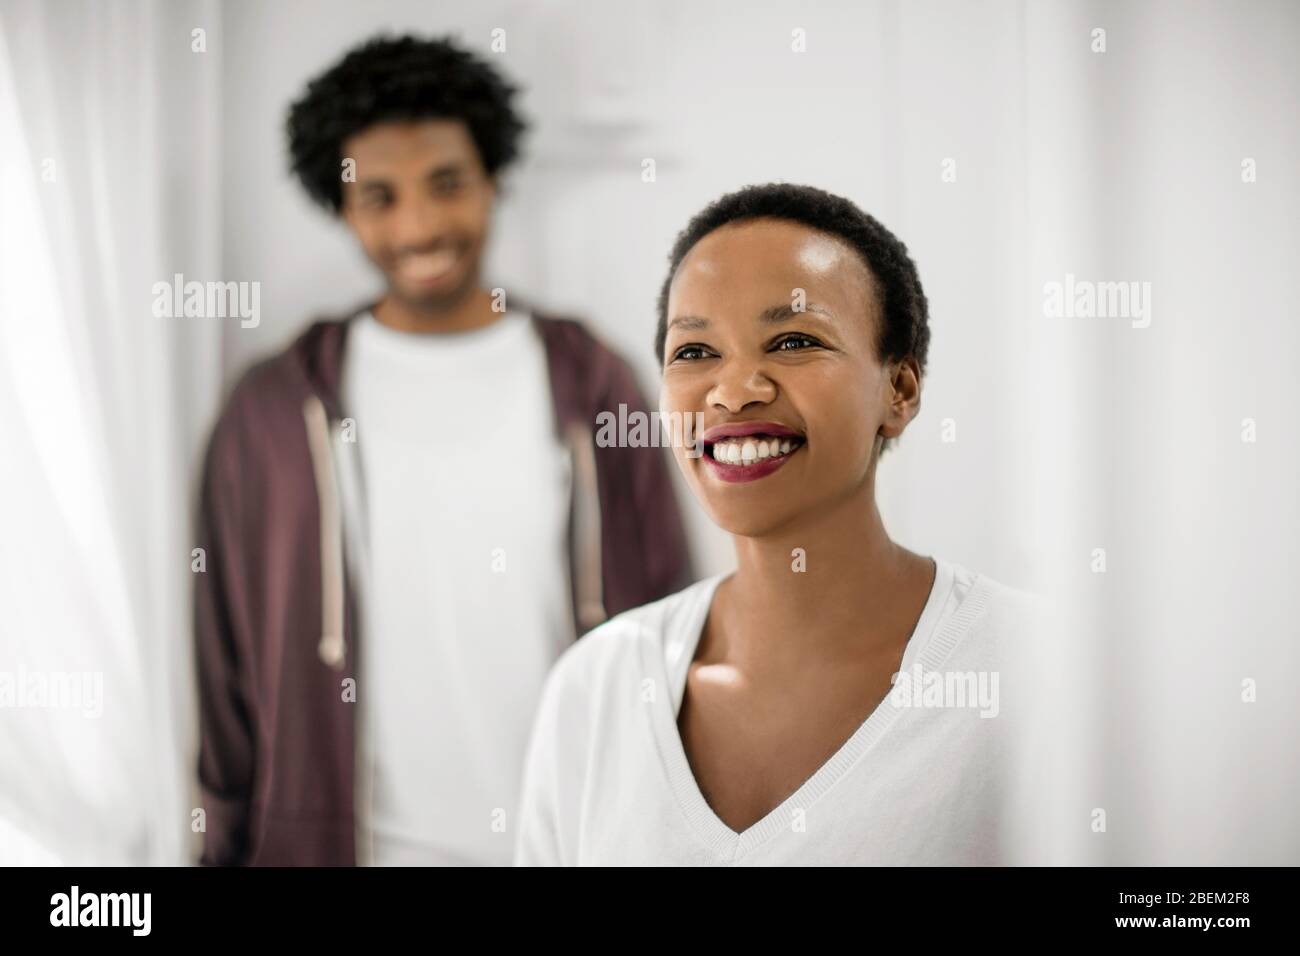 Portrait of a happy young couple Stock Photo